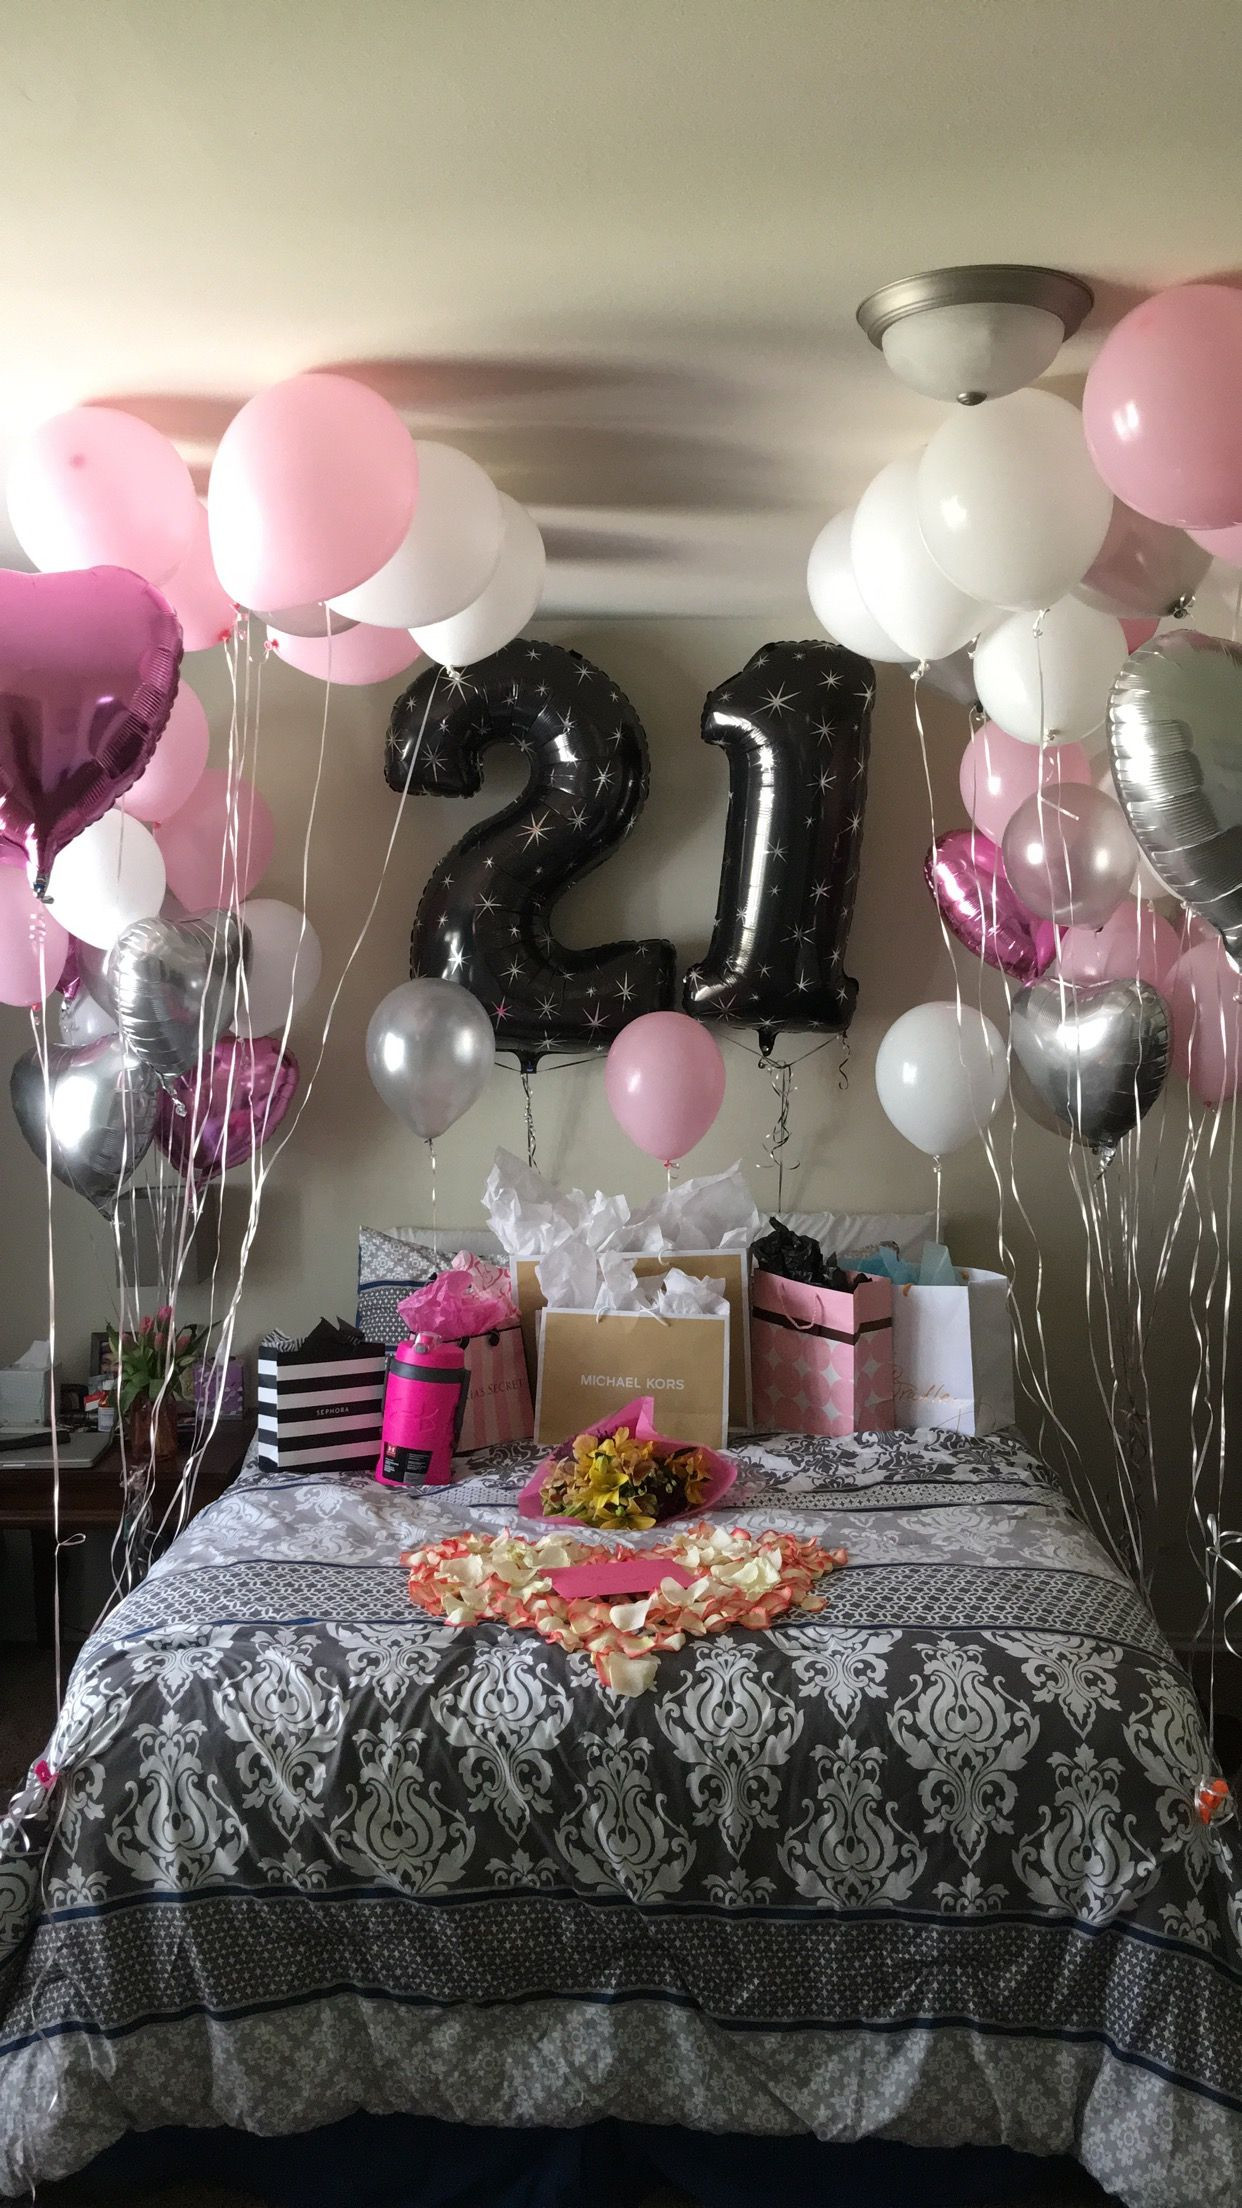 Simple Gift Ideas For Girlfriend
 21st Birthday surprise